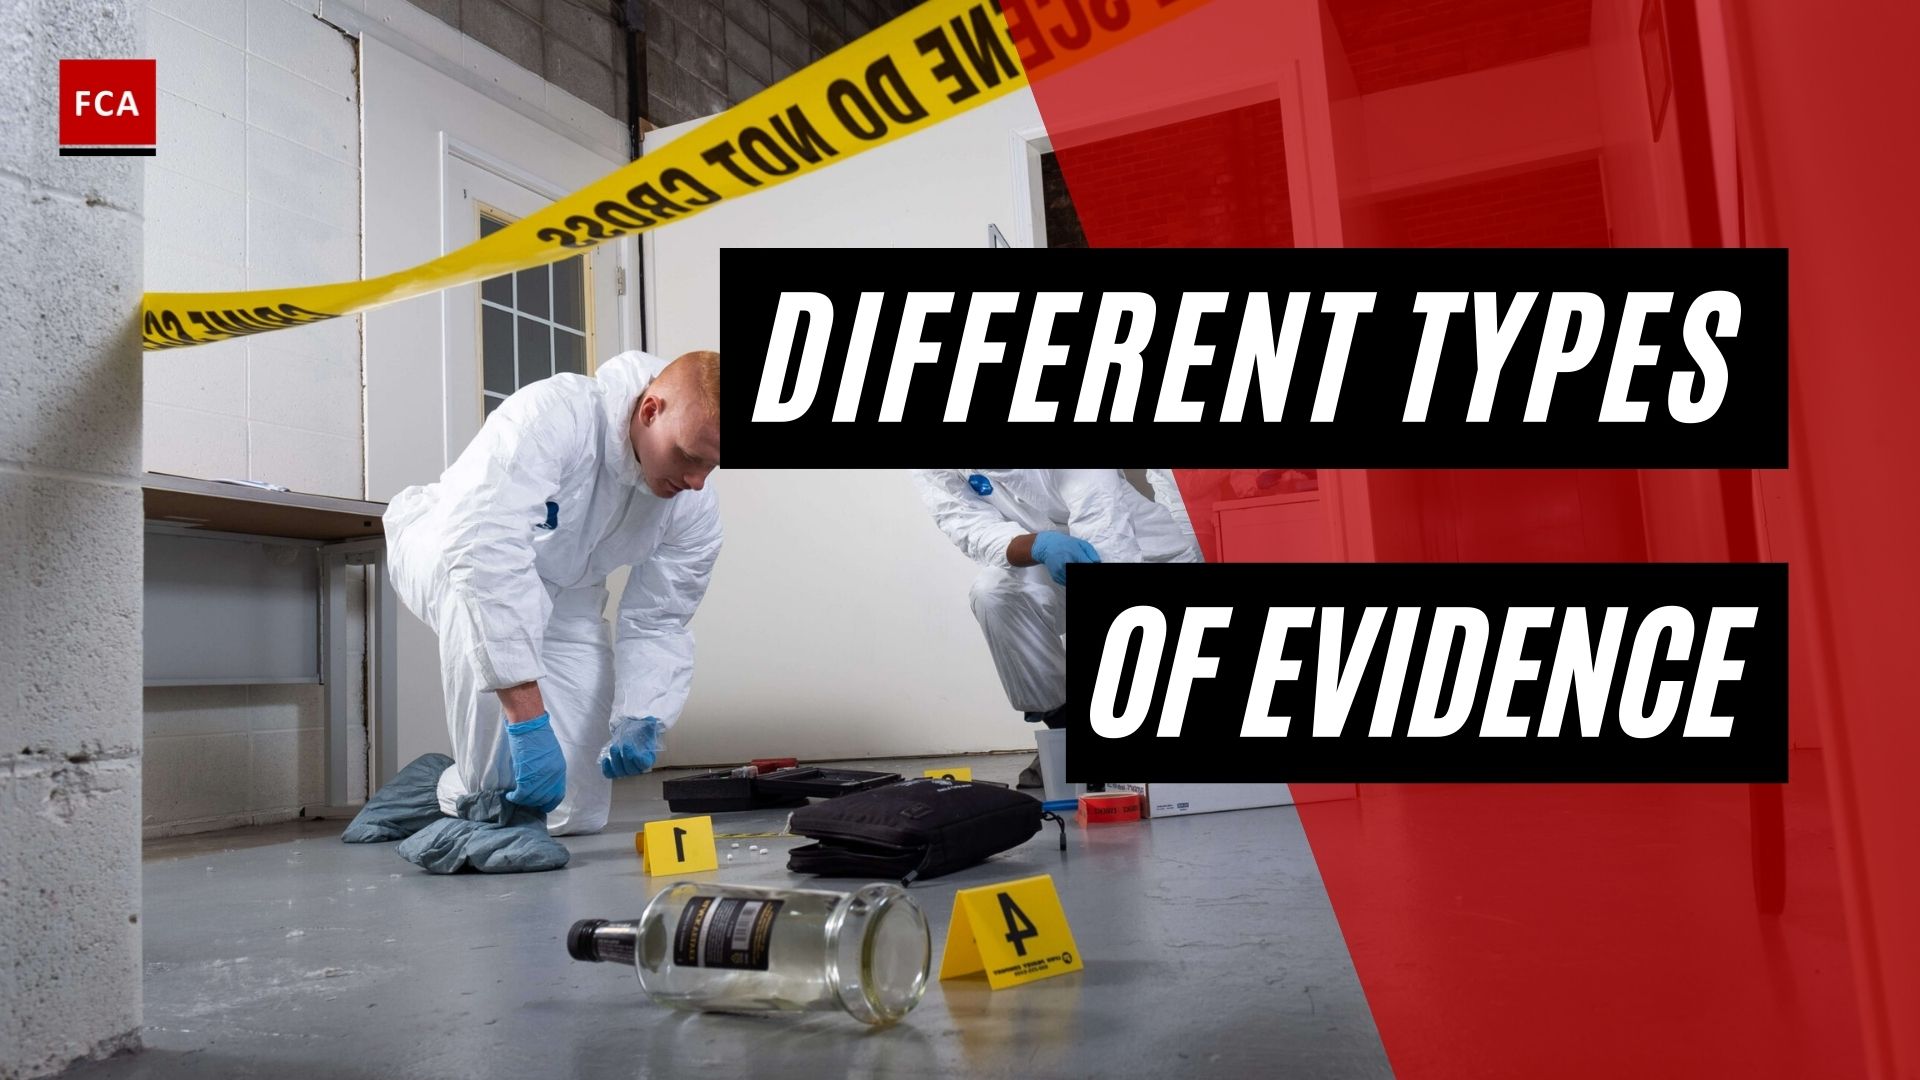 Types Of Evidence